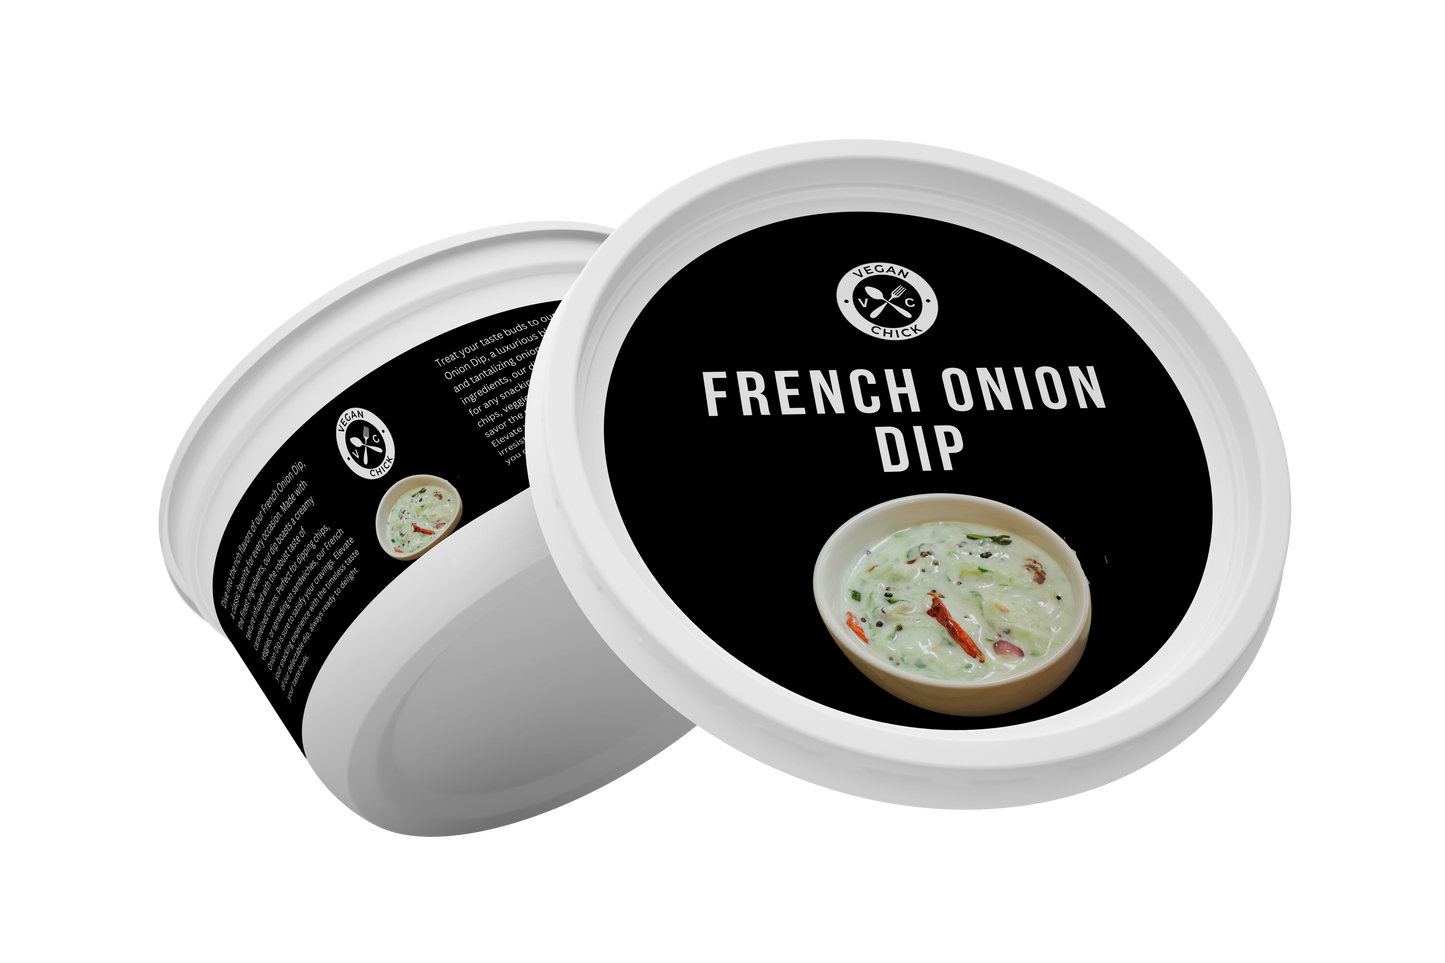 Delicious French Onion Dip